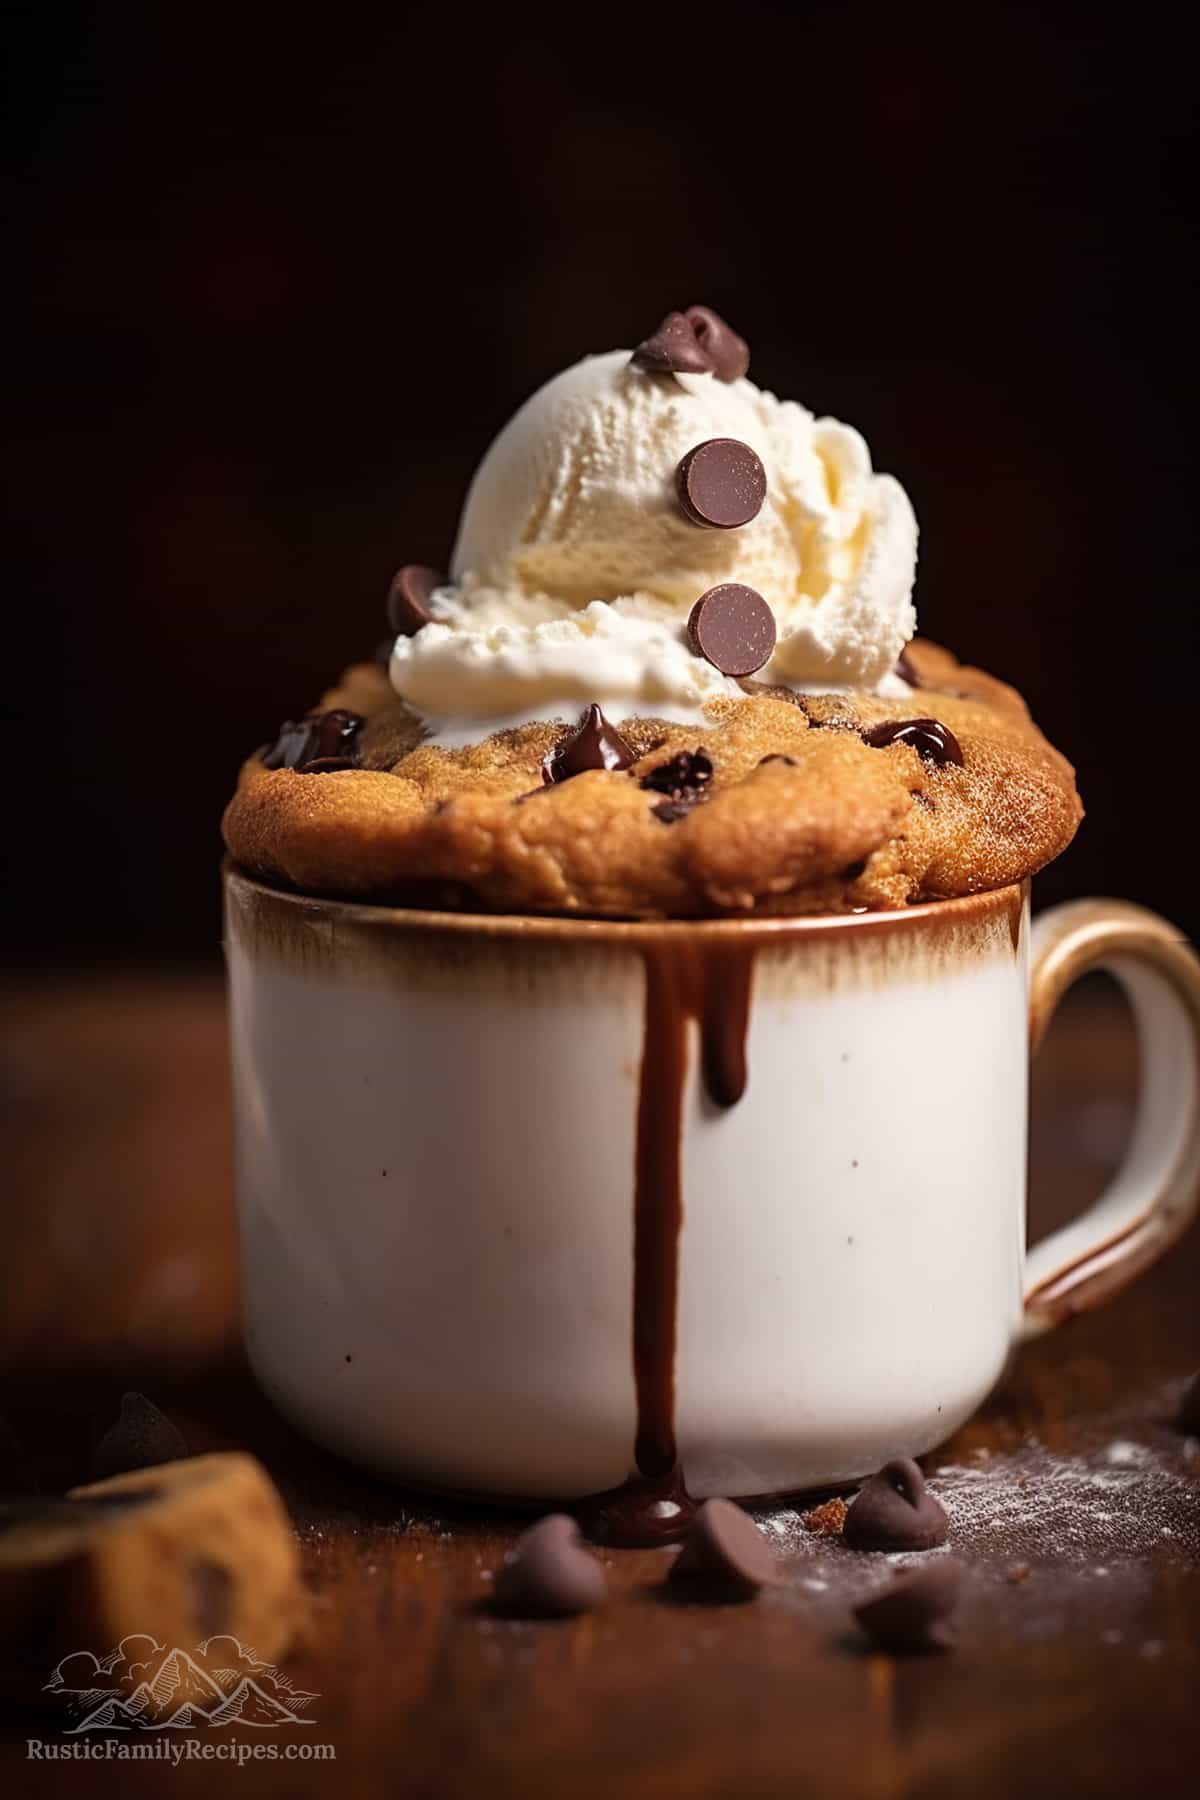 A rustic mug with a chocolate chip cookie in it topped with ice cream